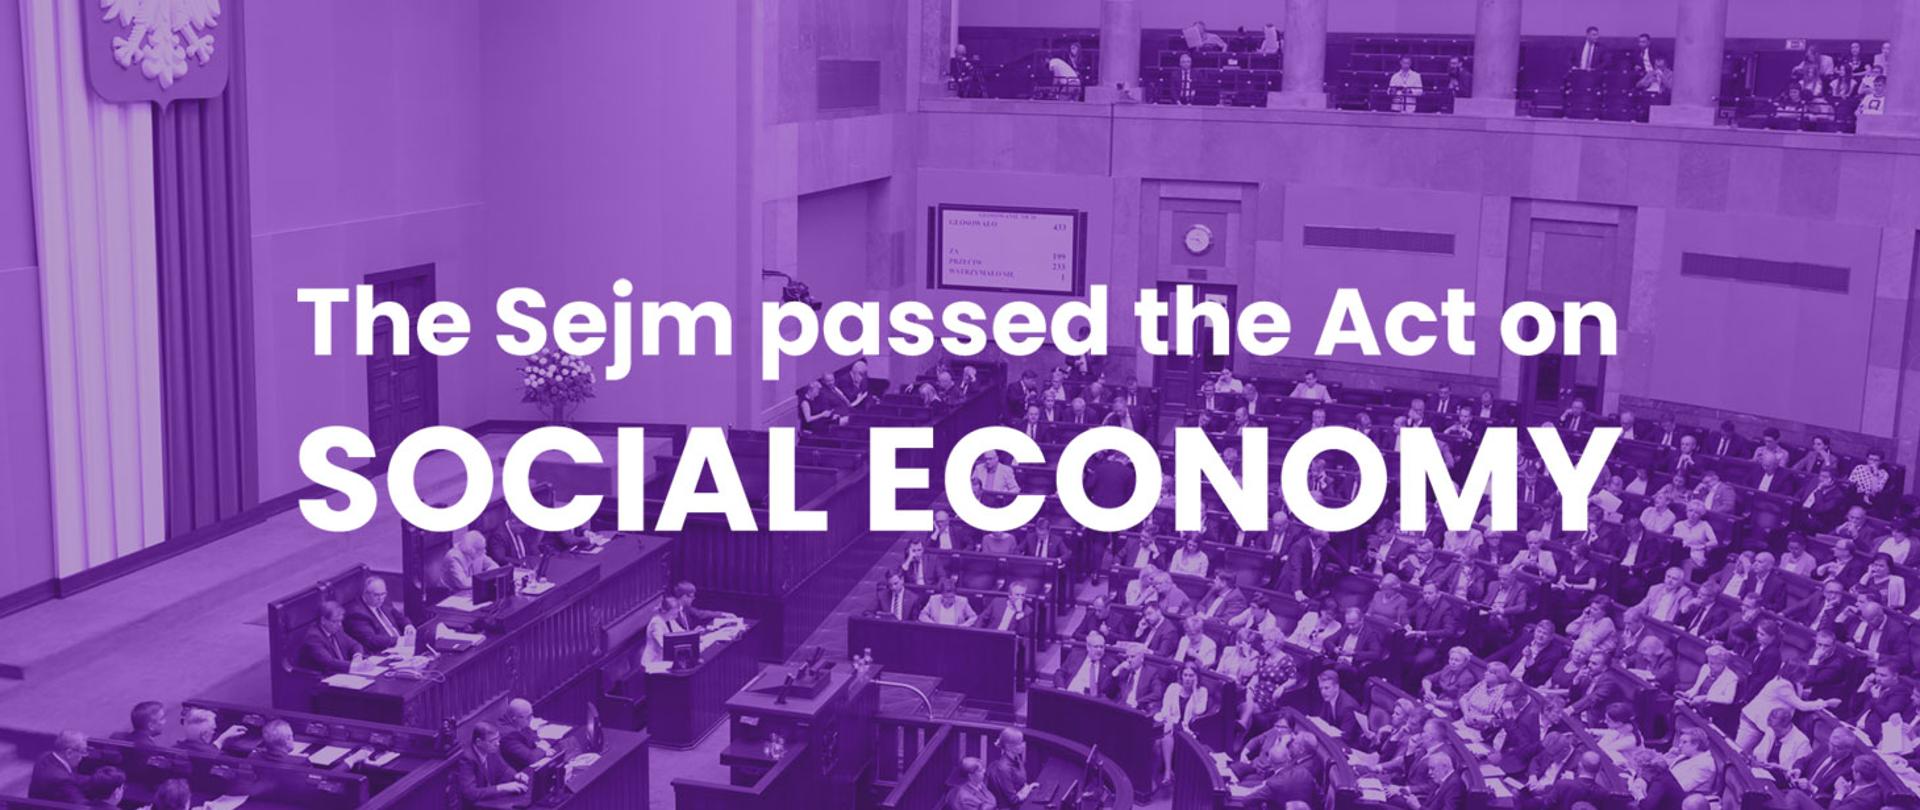 The Sejm passed the Act on social economy